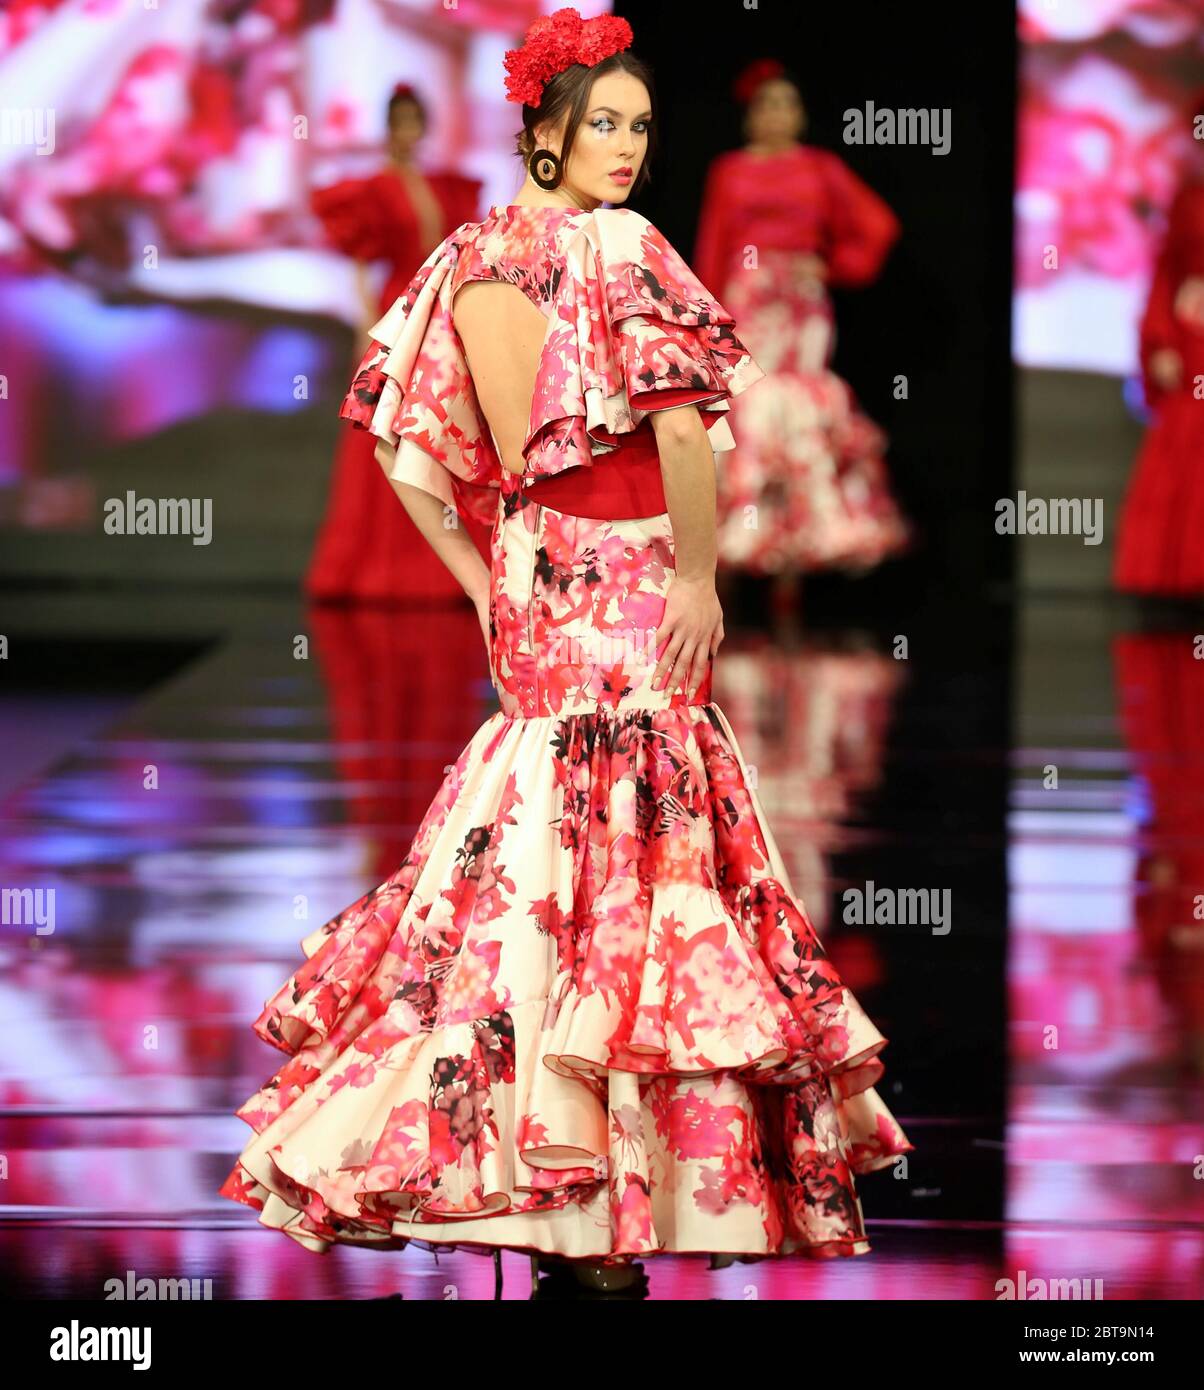 SEVILLA, SPAIN - JAN 31: Model wearing a dress from the Dualismo collection by designer Adelina Infante as part of the SIMOF 2020 (Photo credit: Mickael Chavet) Stock Photo